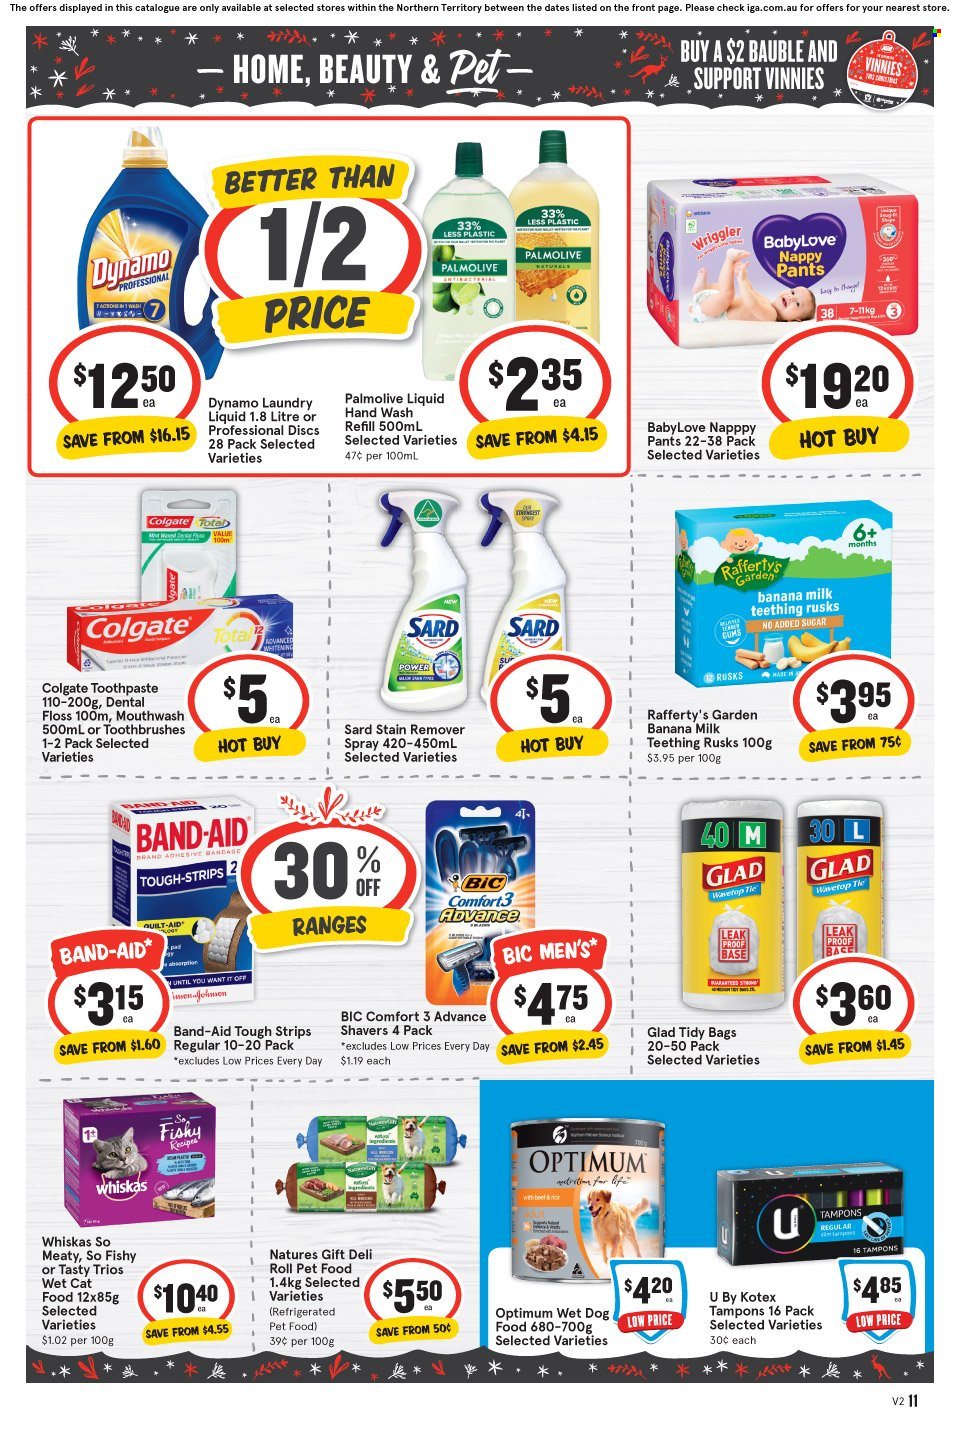 thumbnail - IGA Catalogue - 30 Nov 2022 - 6 Dec 2022 - Sales products - rusks, milk, strips, rice, pants, nappies, Johnson's, BabyLove, stain remover, laundry detergent, hand wash, Palmolive, Colgate, toothpaste, mouthwash, Kotex, tampons, BIC, bag, bauble, quilt, animal food, cat food, dog food, wet dog food, Whiskas, Optimum, wet cat food, band-aid. Page 12.